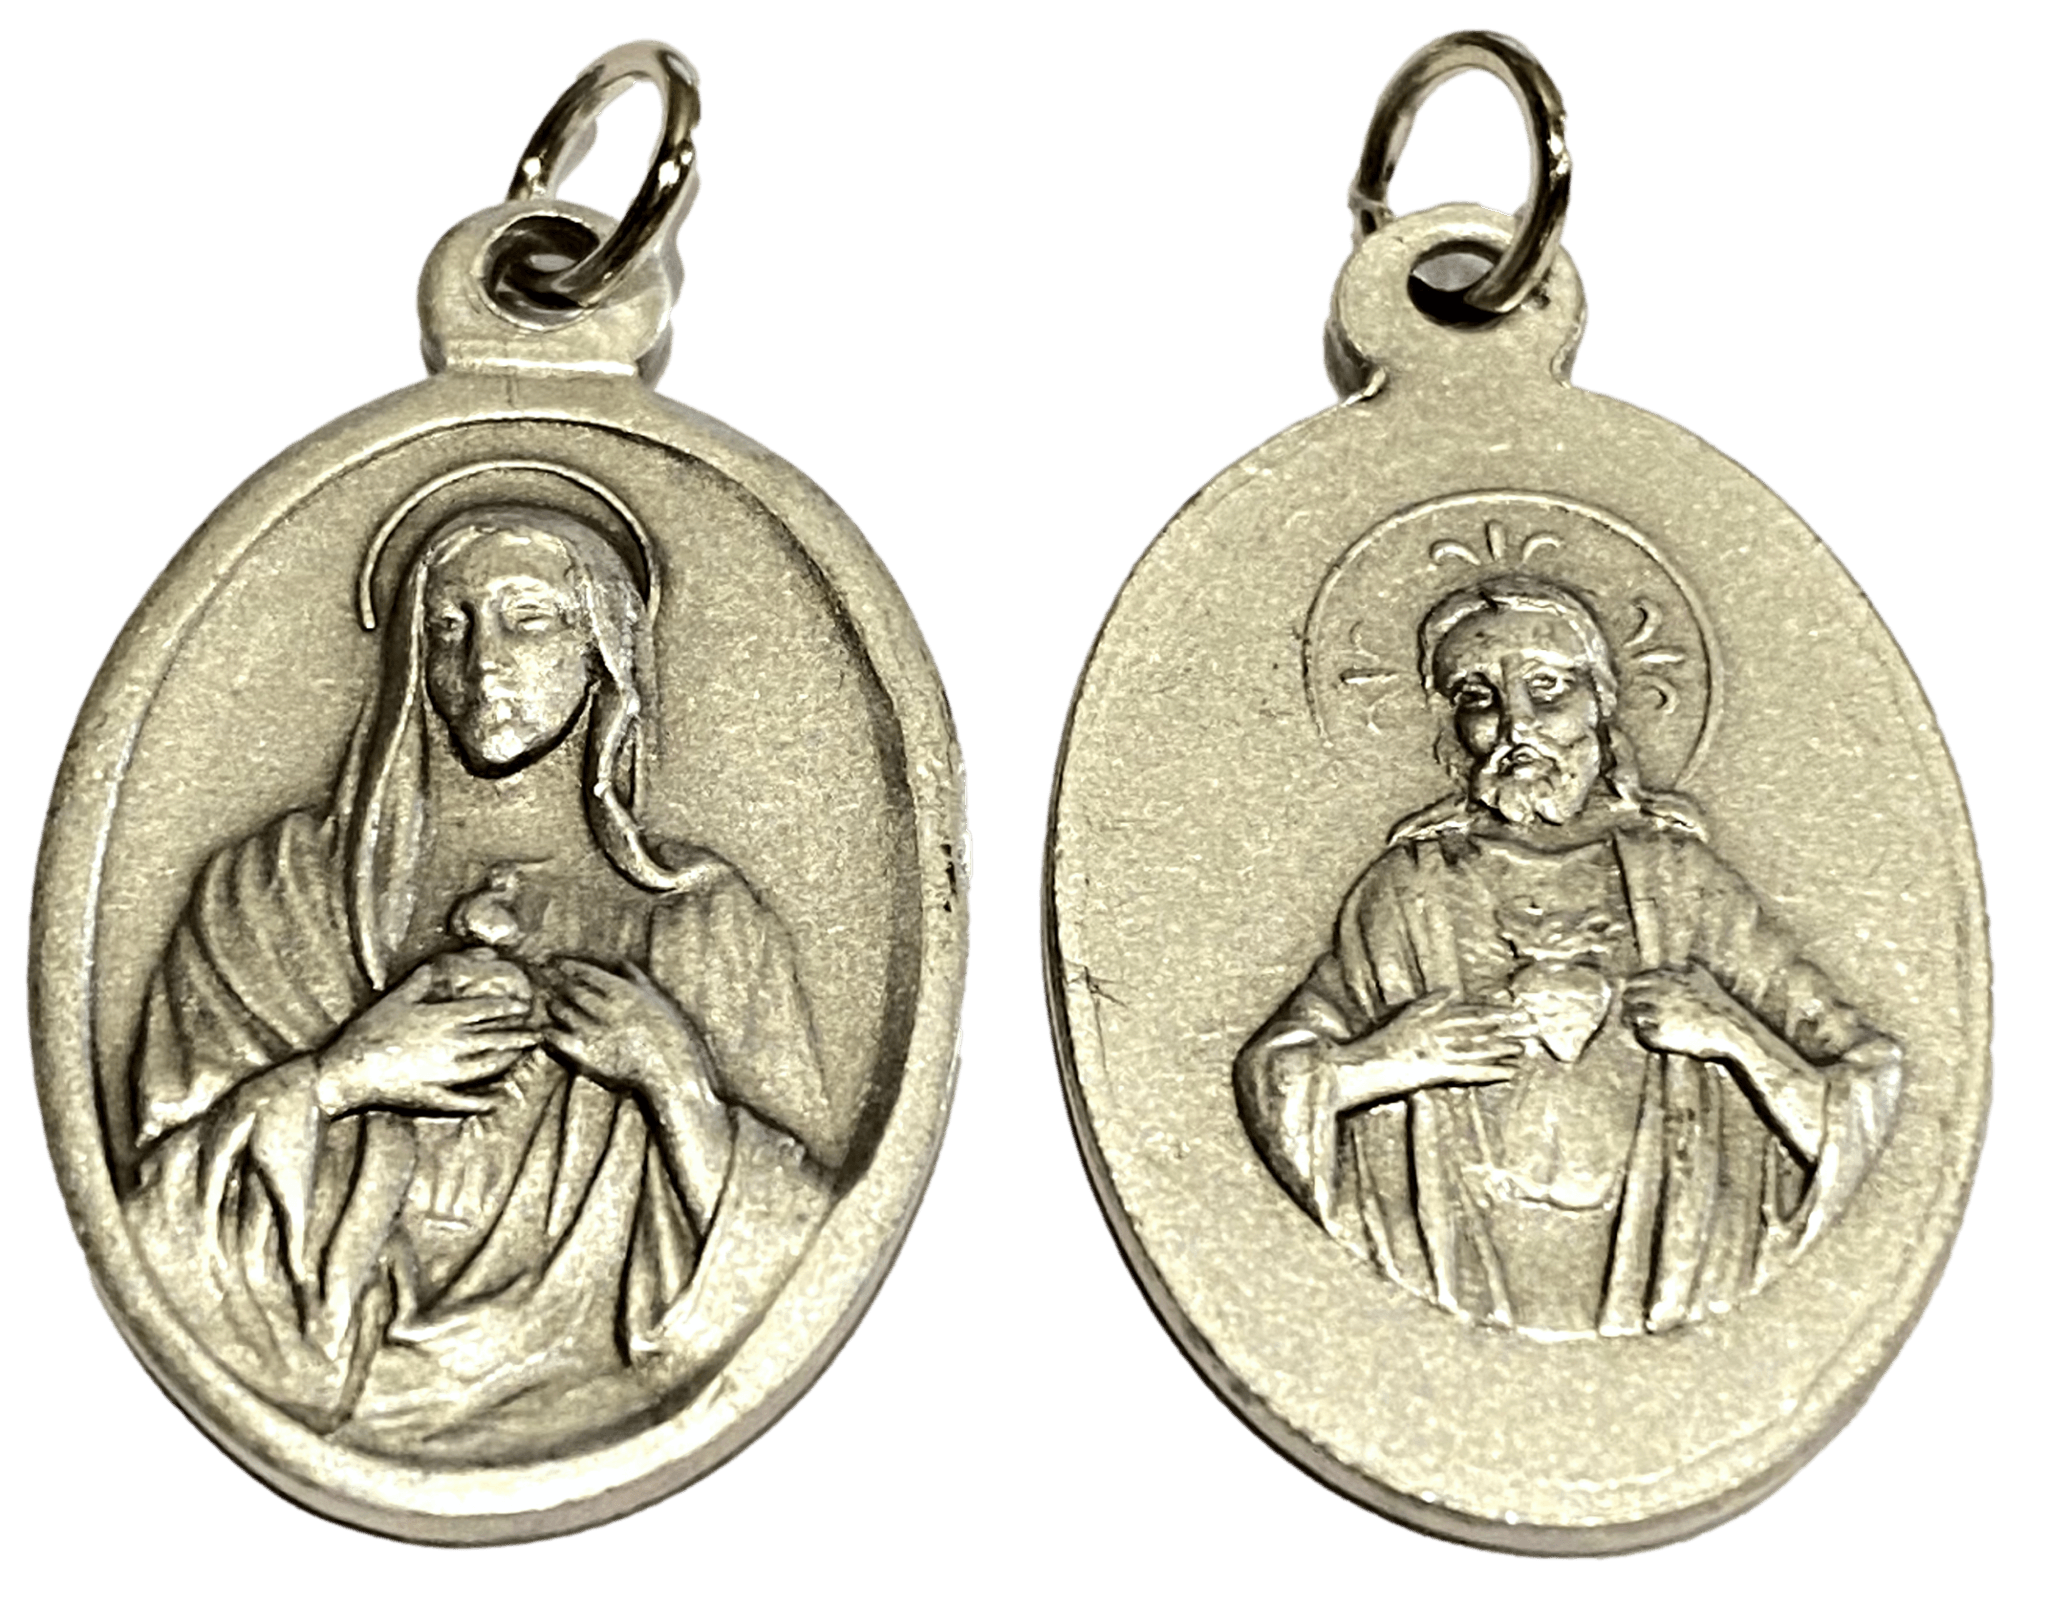 Medal Immaculate Conception Sacred Heart Of Jesus Italian Double-Sided Silver Oxidized Metal Alloy 1 inch - Ysleta Mission Gift Shop- VOTED El Paso's Best Gift Shop